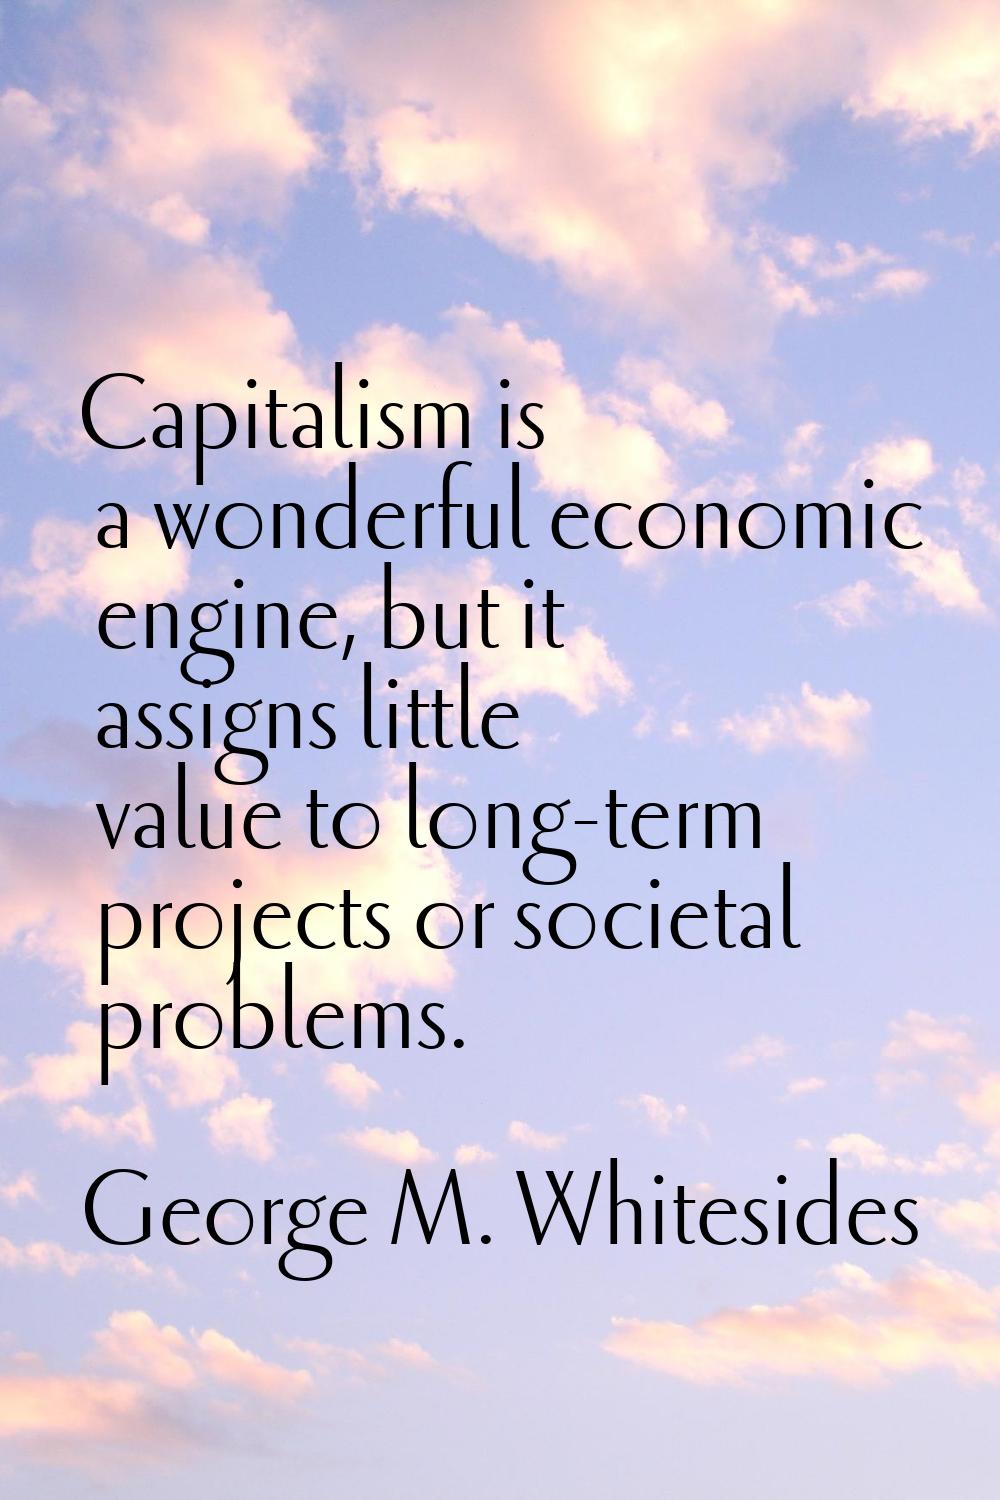 Capitalism is a wonderful economic engine, but it assigns little value to long-term projects or soc